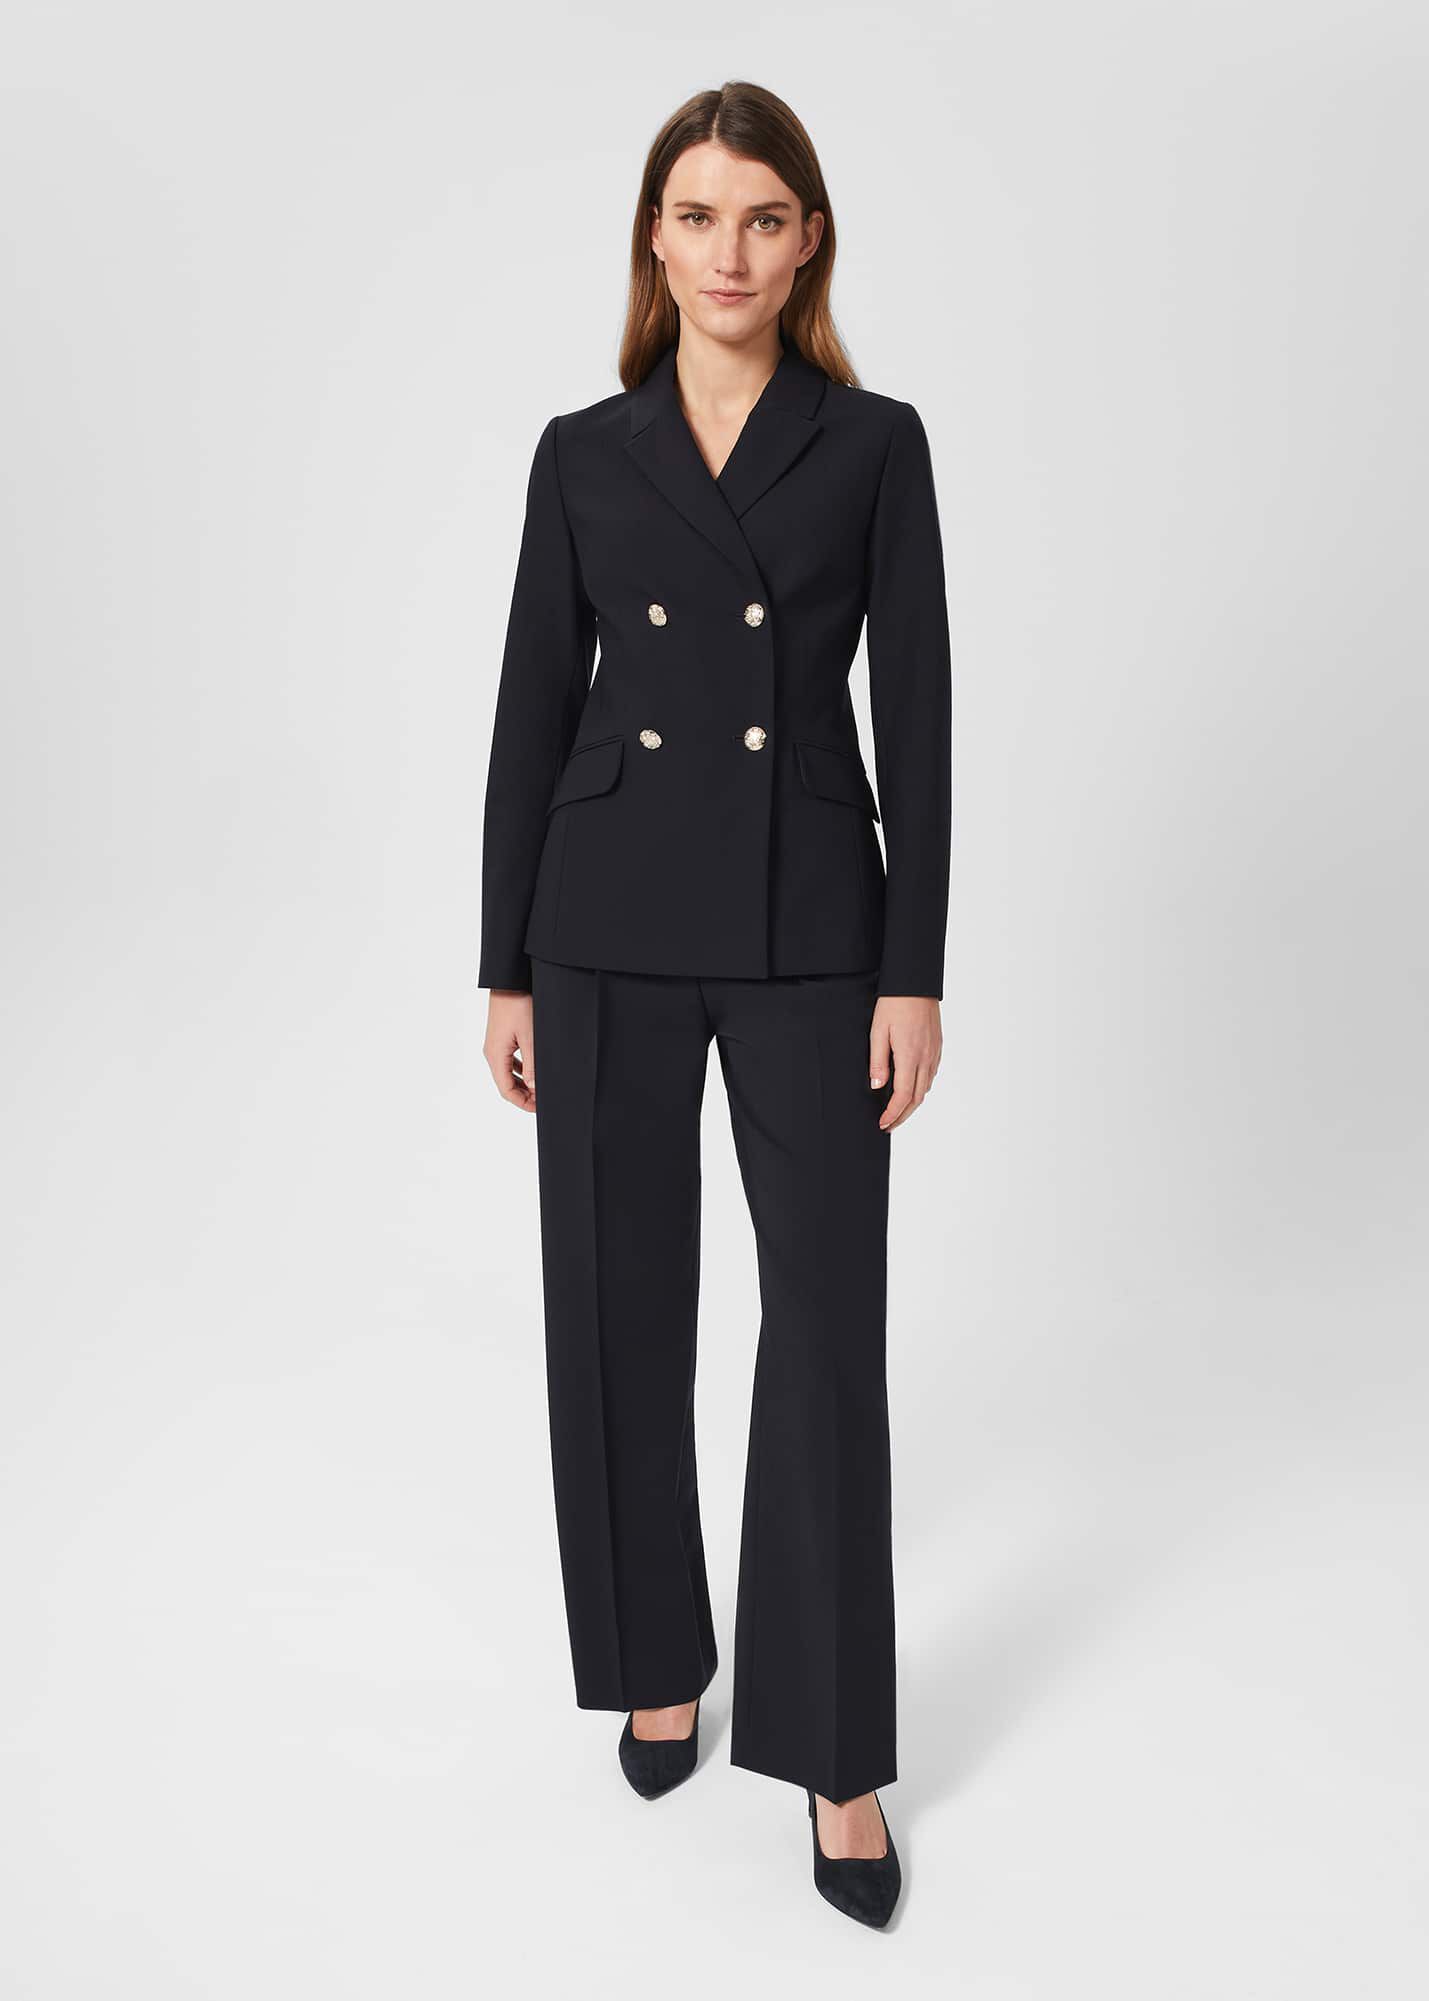 The best trouser suits for spring bold colours and sharp tailoring